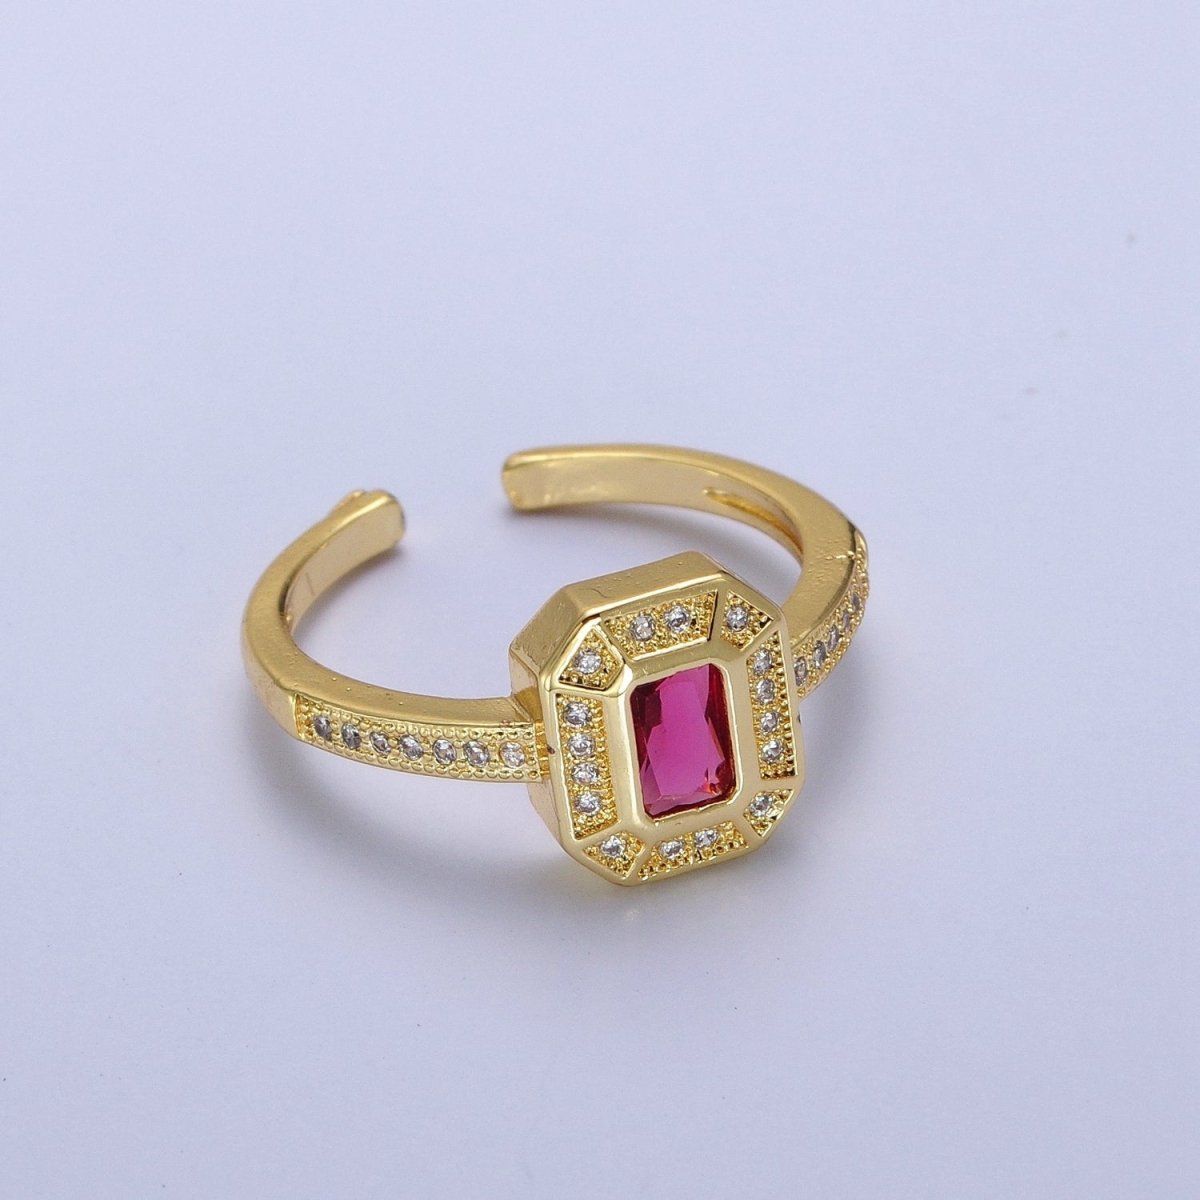 24K Gold Filled Micro Paved Octagonal Adjustable Ring with Fuchsia Baguette Cubic Zirconia | X-562 - DLUXCA